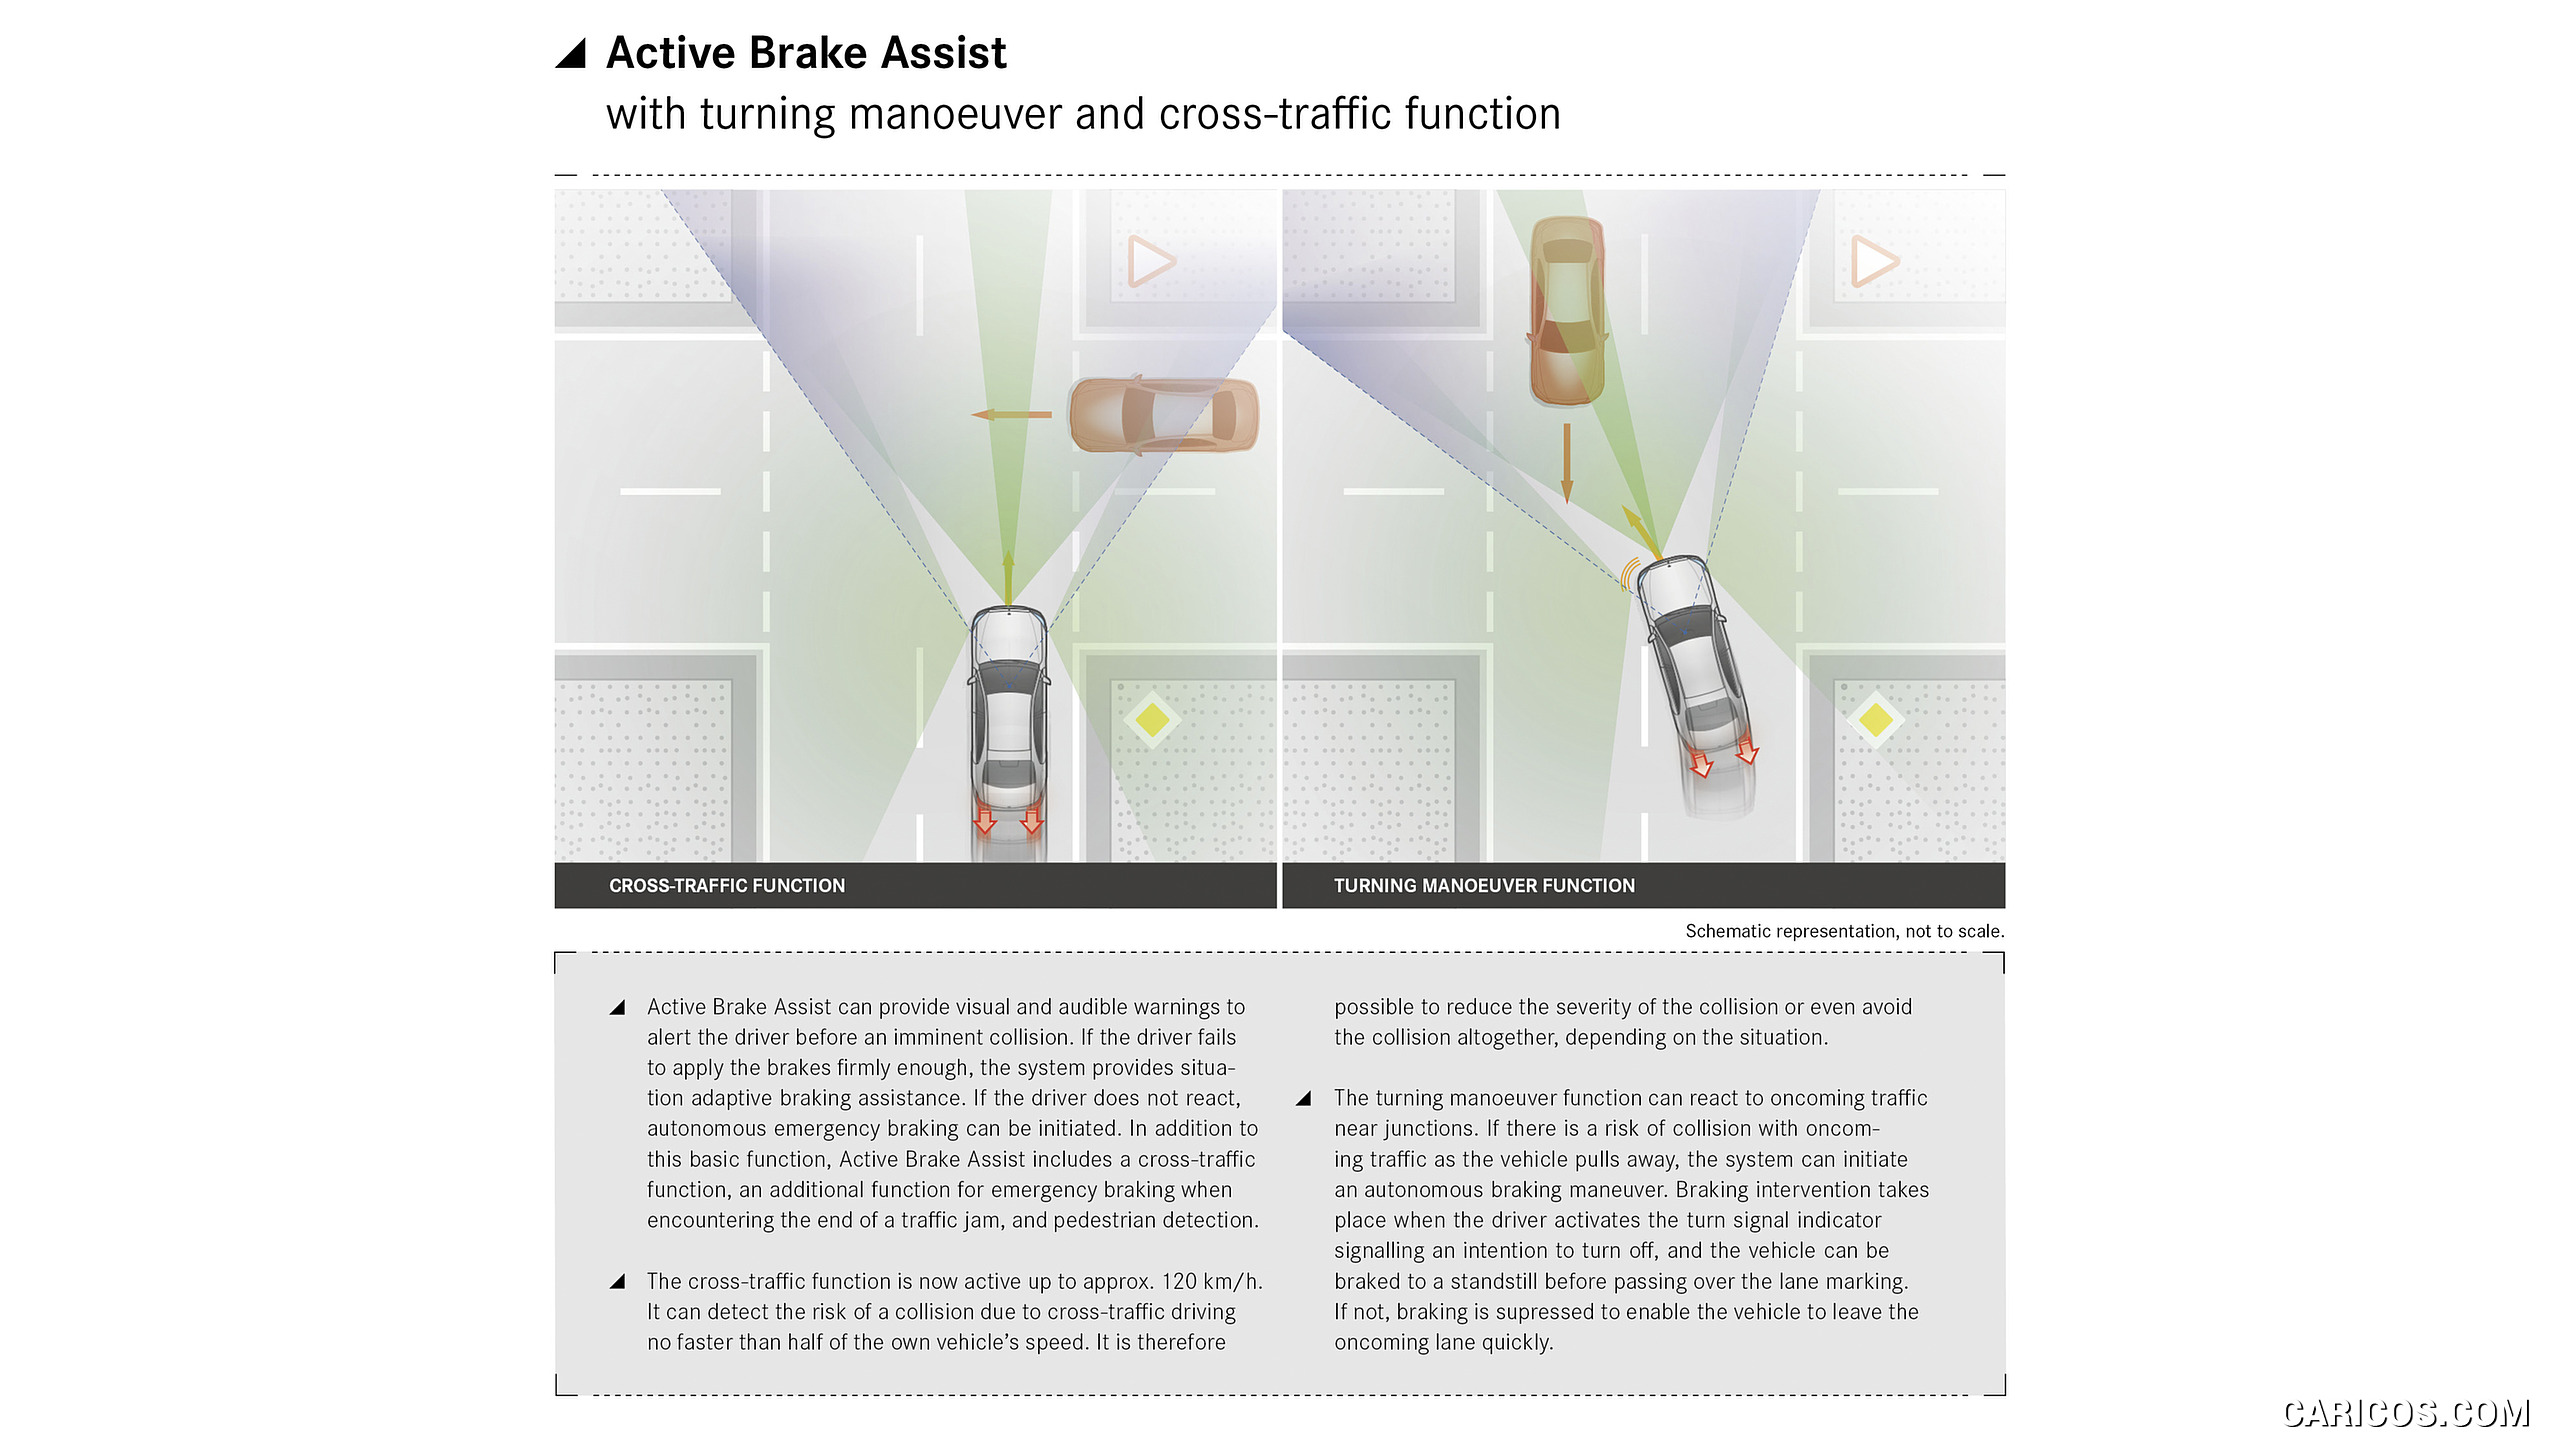 2021 Mercedes-Benz S-Class - Driving assistance system: Active Brake Assist with with turning manoeuver and cross-traffic function, #199 of 316